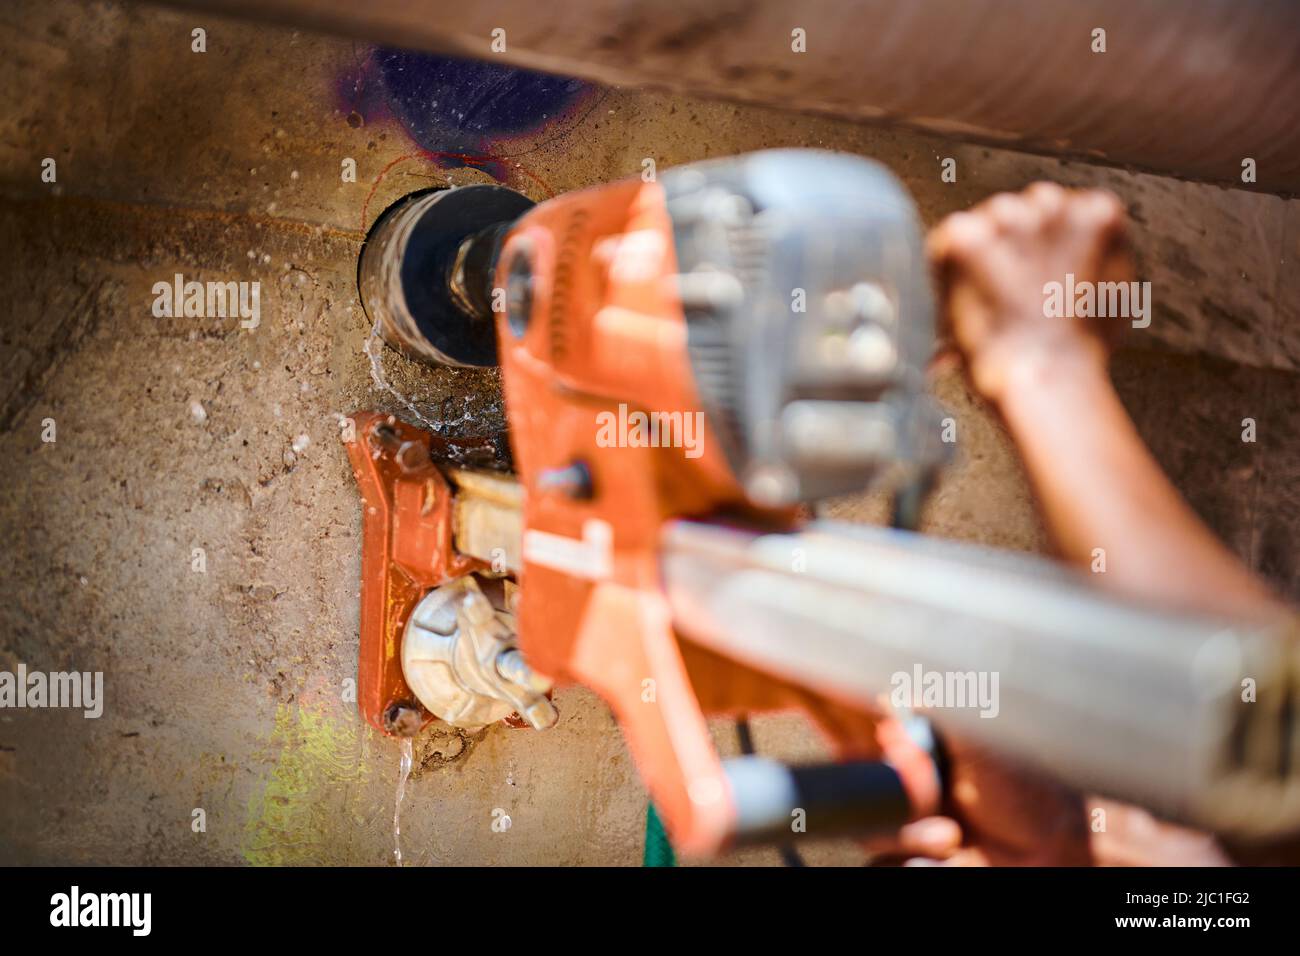 A construction working uses an industrial water-fed core drill to cut through an exterior concrete retaining wall. Stock Photo